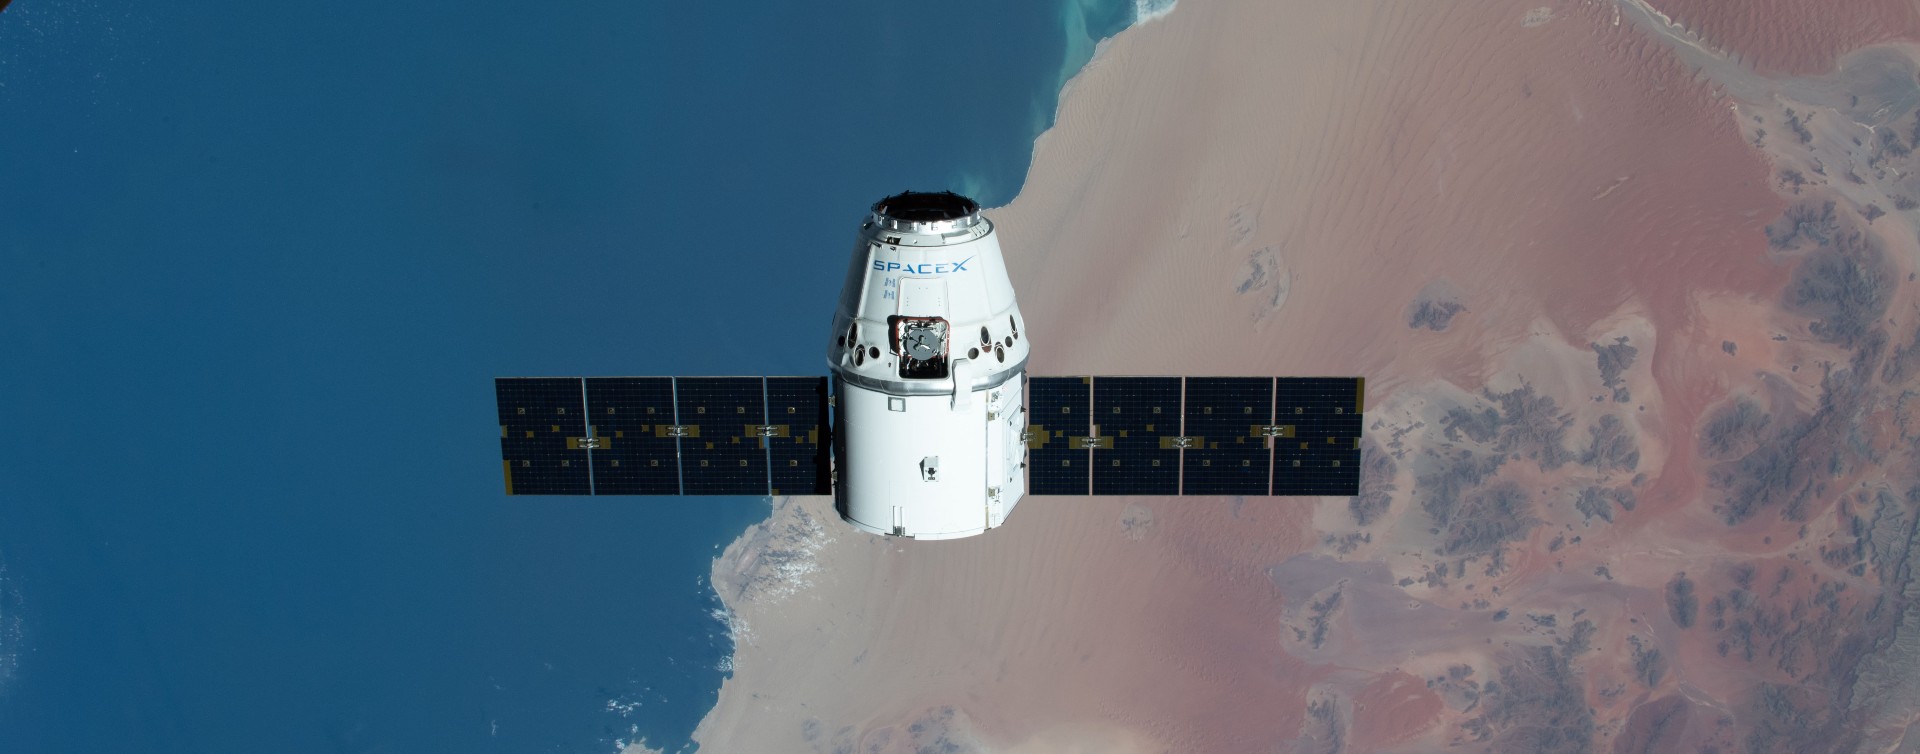 SpaceX’s Inspiration4 safely returns to Earth after a historic 3-day orbit